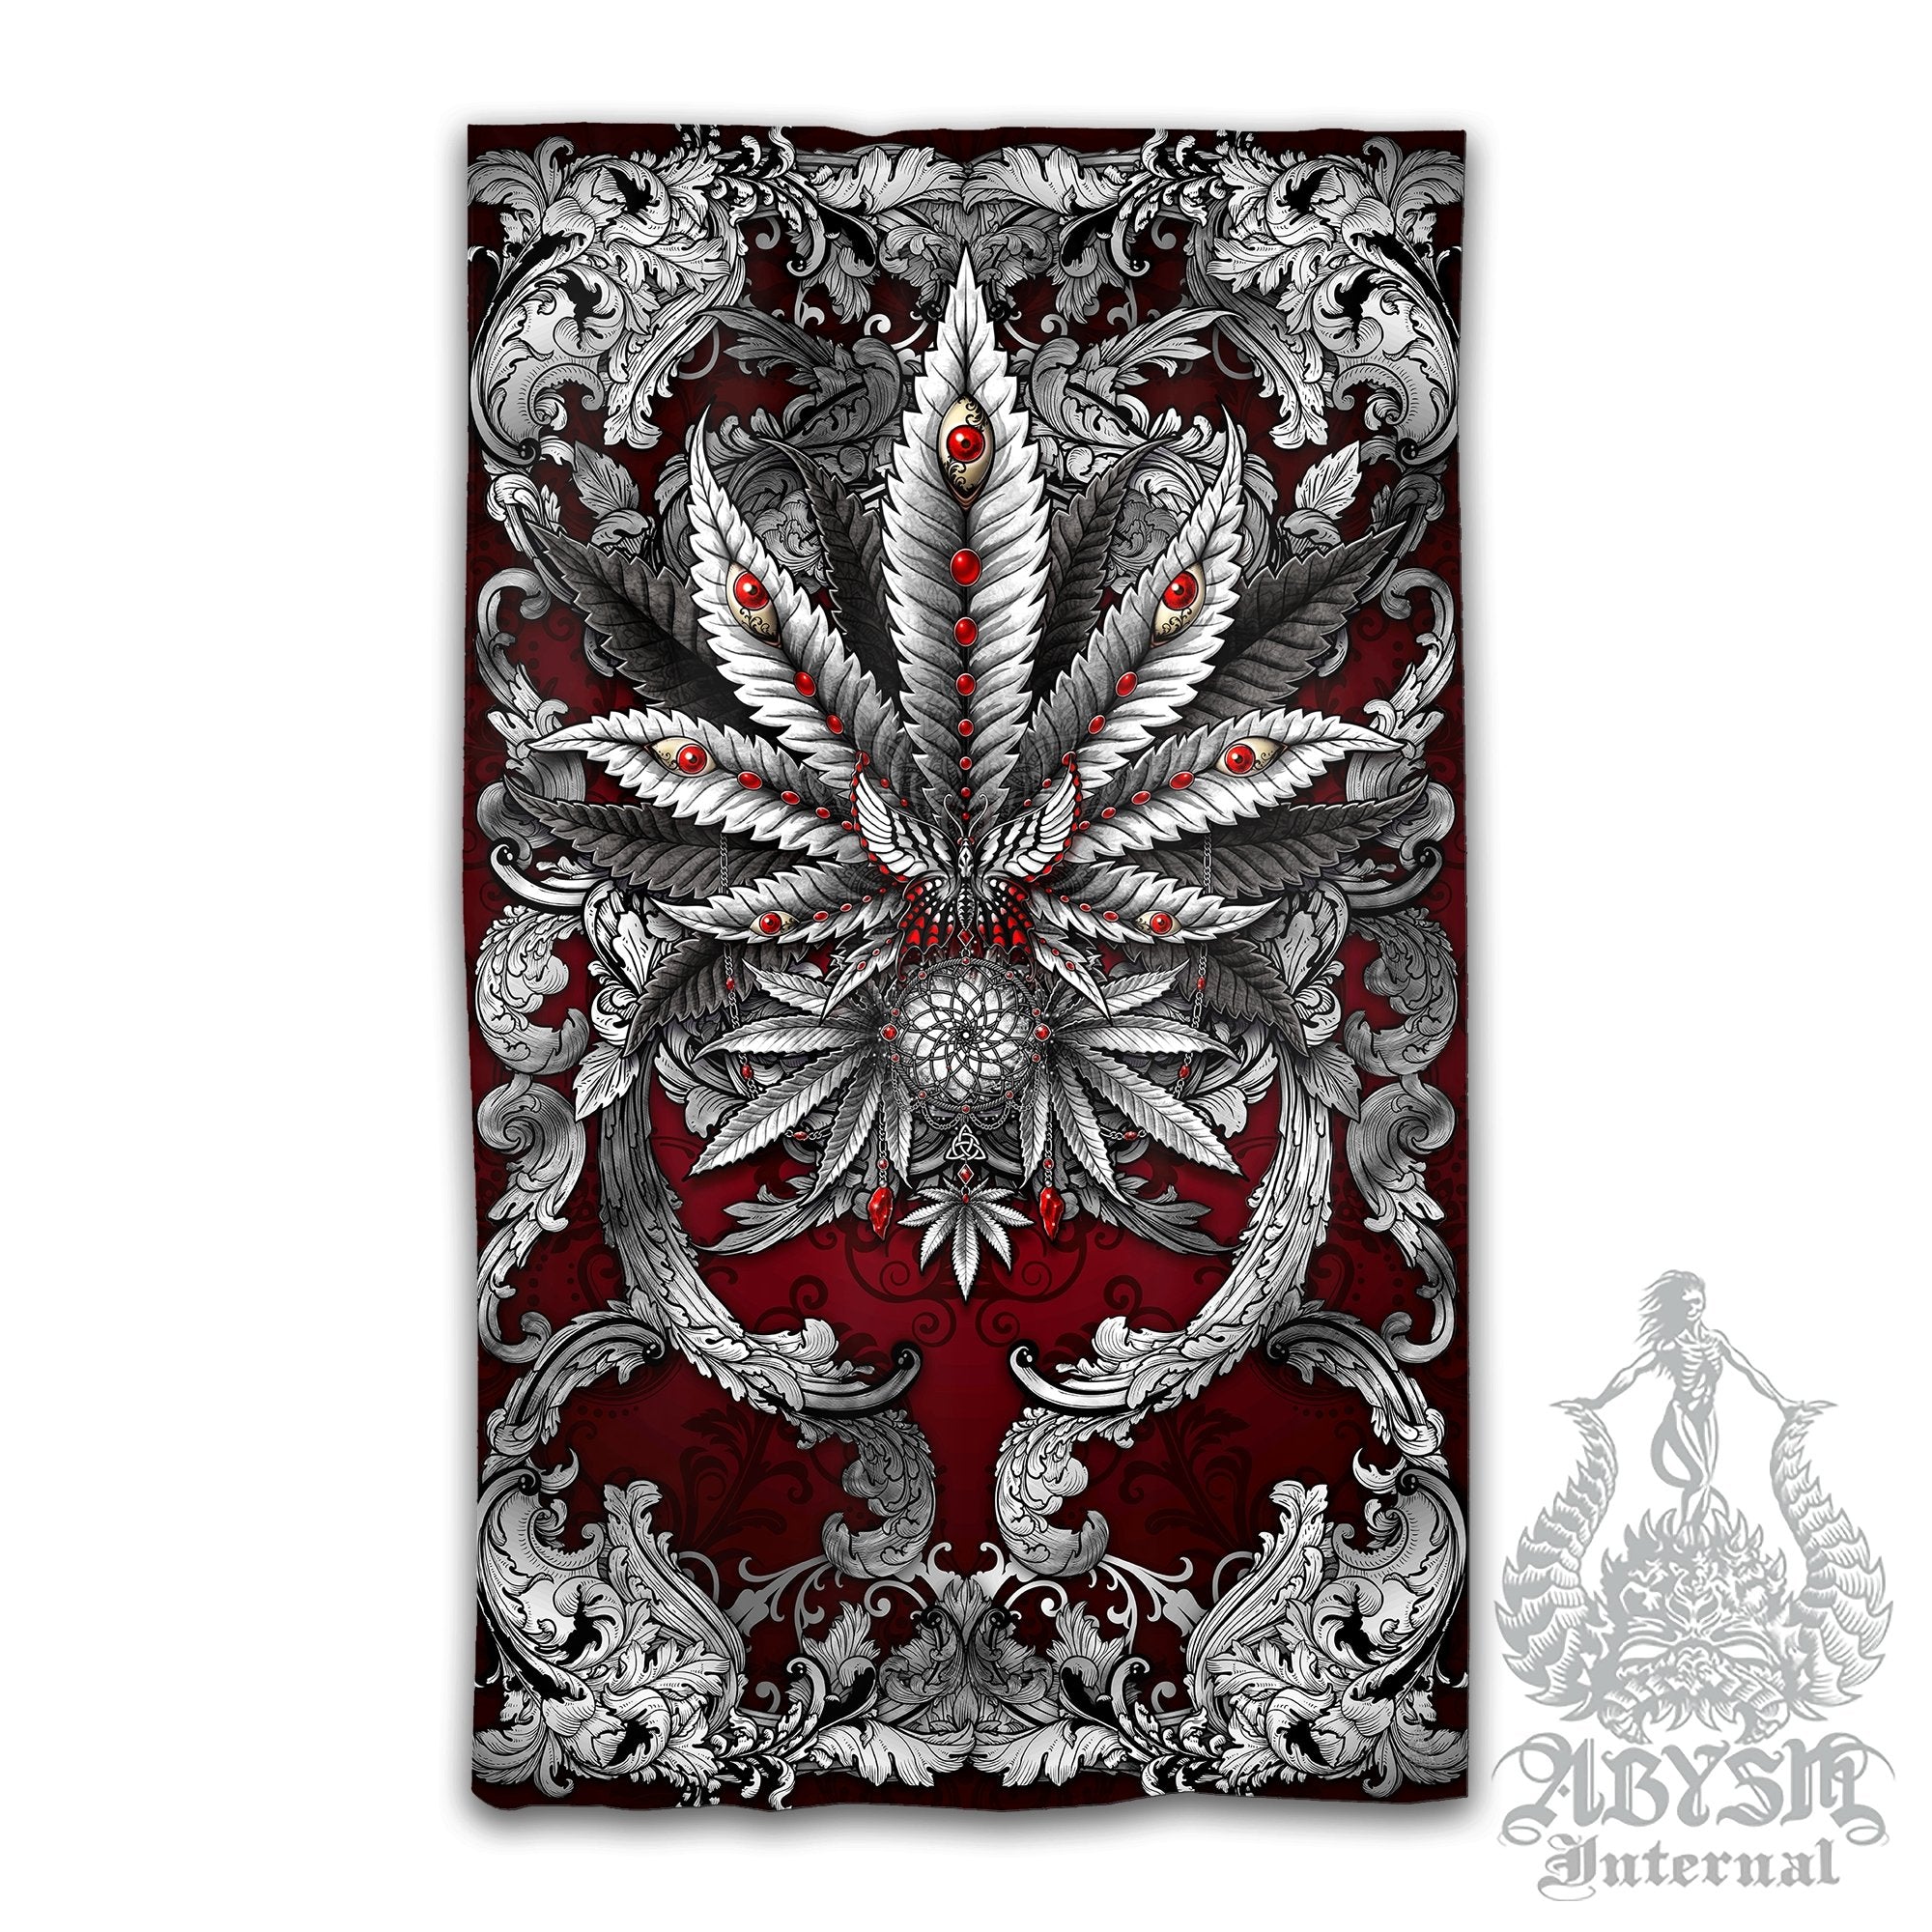 Weed Blackout Curtains, Cannabis Home and Shop Decor, Long Window Panels, Indie 420 Room Art Print - Silver - Abysm Internal